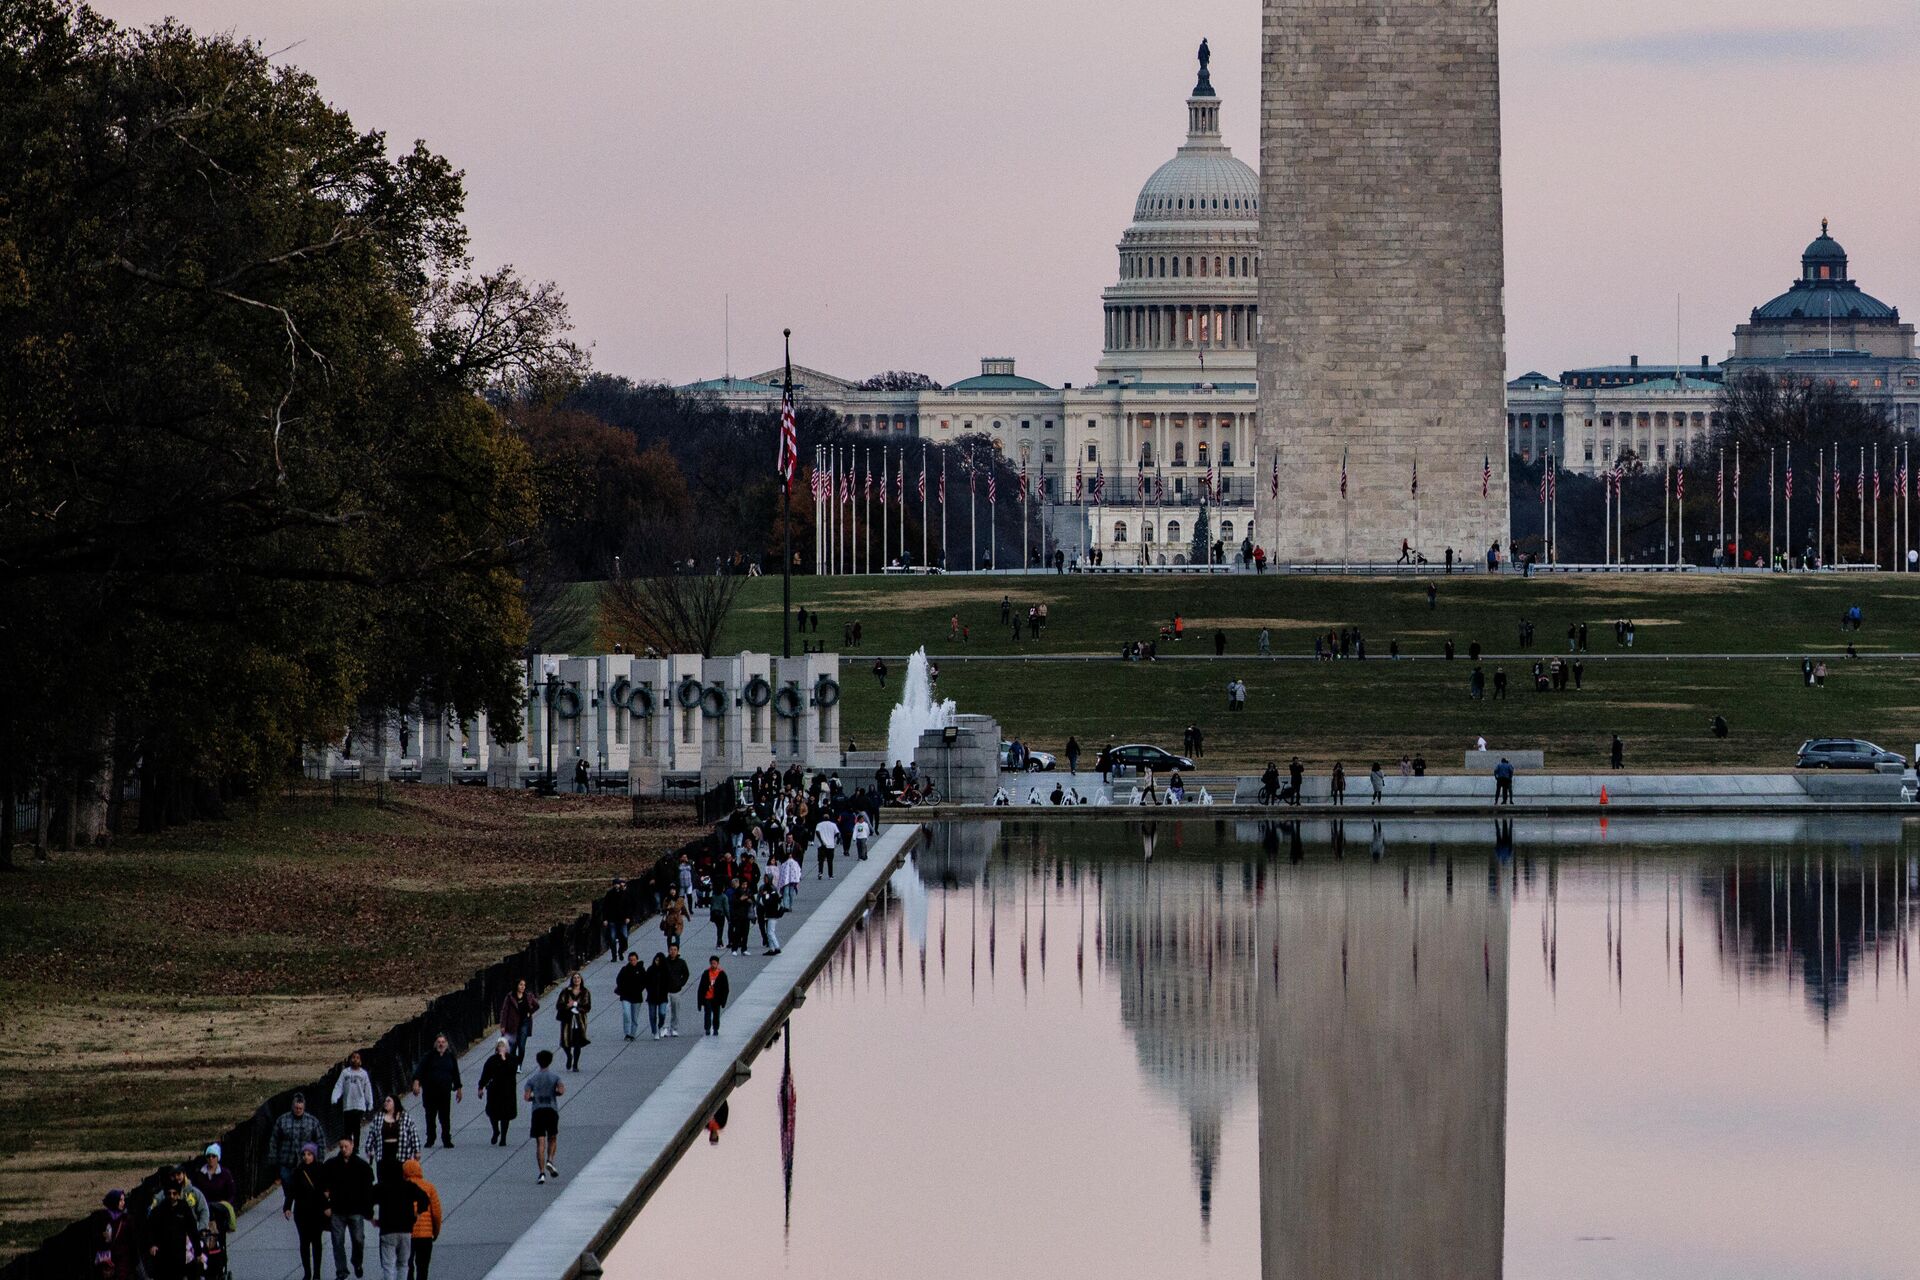 The U.S. Capitol Building is seen past the Washington Monument as people walk around the Reflecting Pool on the National Mall as the sun sets on November 28, 2021 in Washington, DC. President Biden returned to Washington after spending the Thanksgiving Holiday with family in Nantucket and immediately met with members of his medical team to discuss the newly discovered Omicron variant of the coronavirus. - Sputnik International, 1920, 13.01.2022